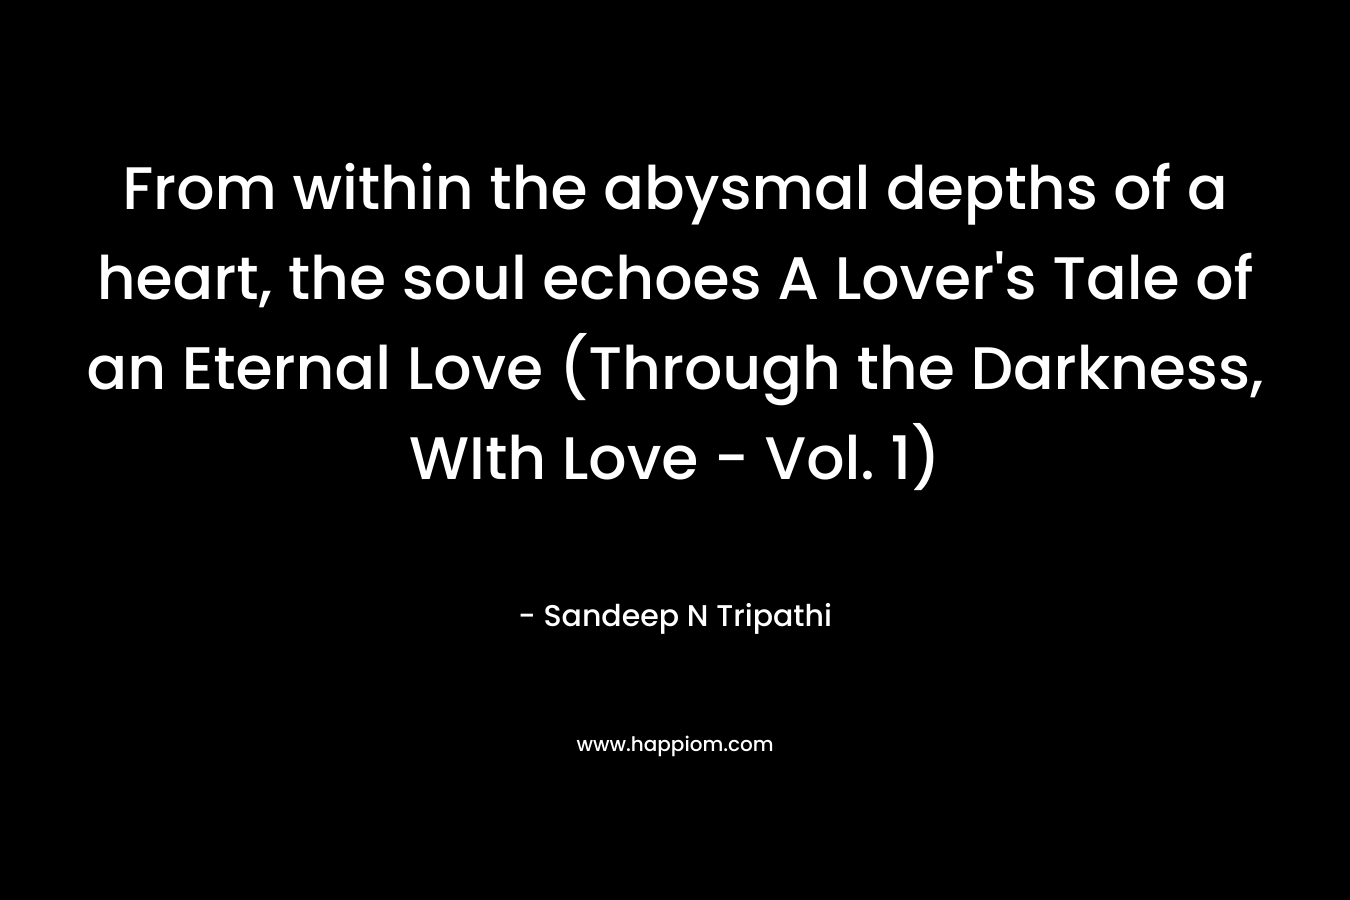 From within the abysmal depths of a heart, the soul echoes A Lover's Tale of an Eternal Love (Through the Darkness, WIth Love - Vol. 1)